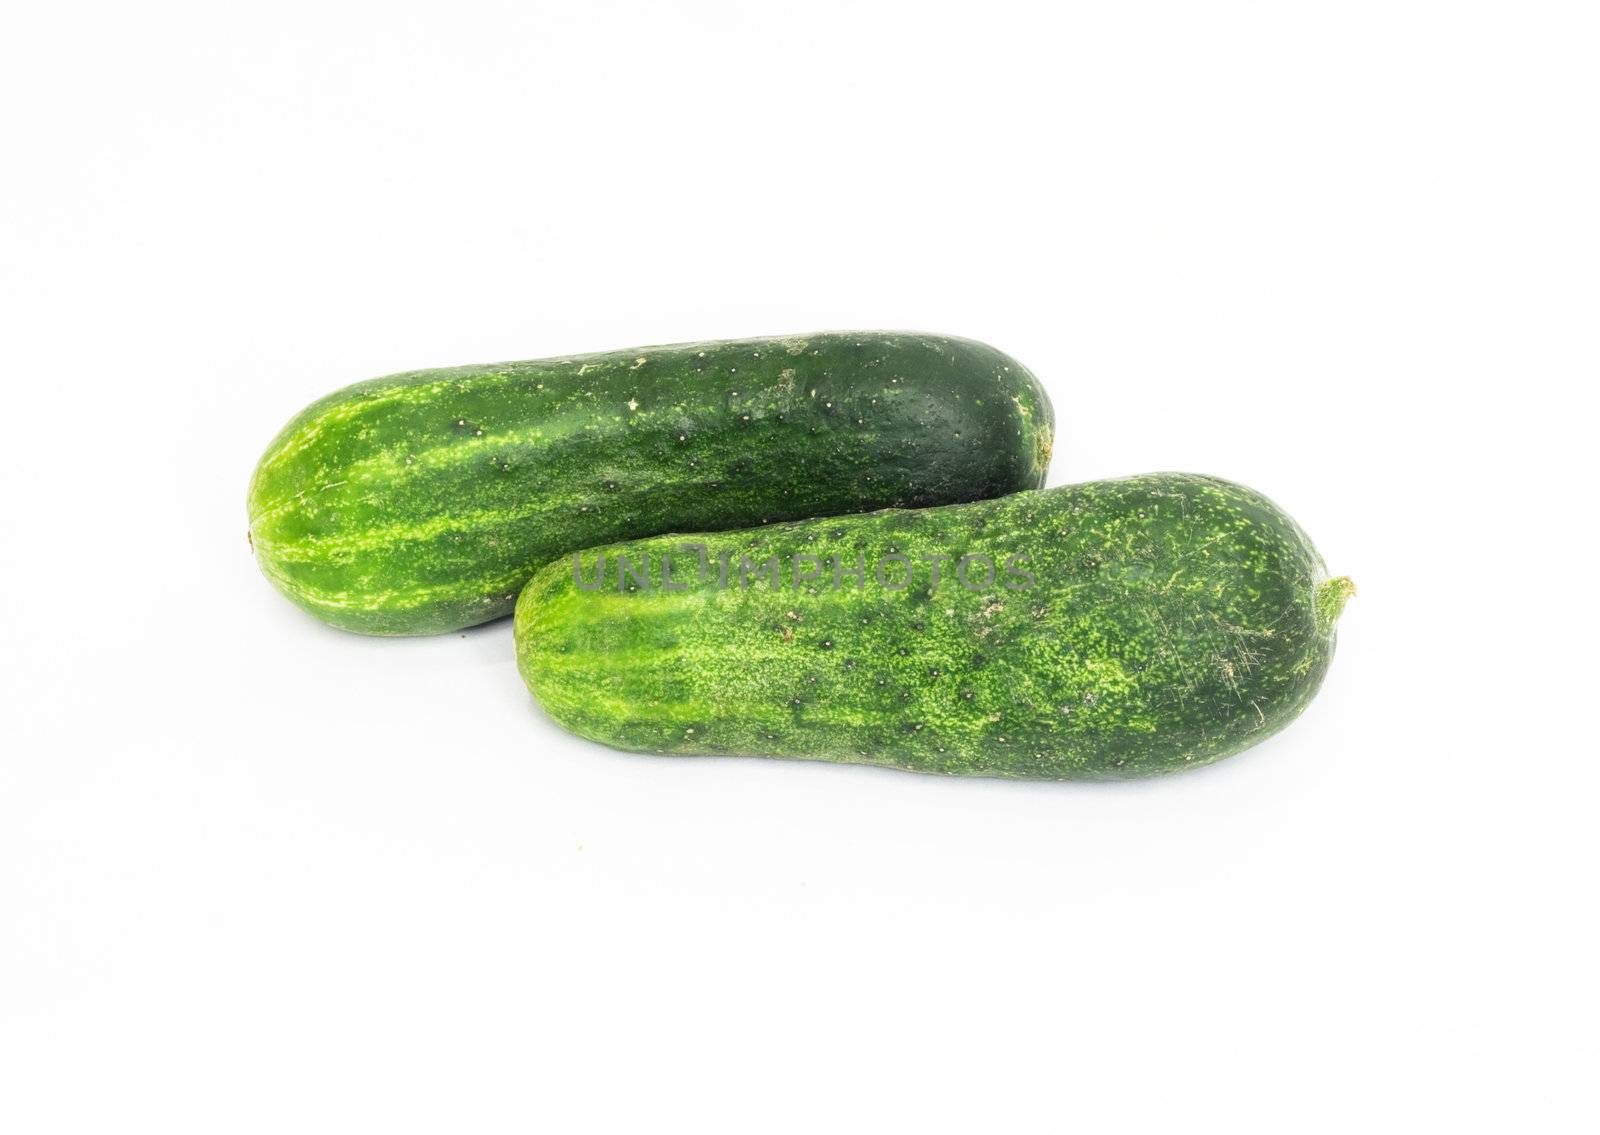 Two cucumbers 